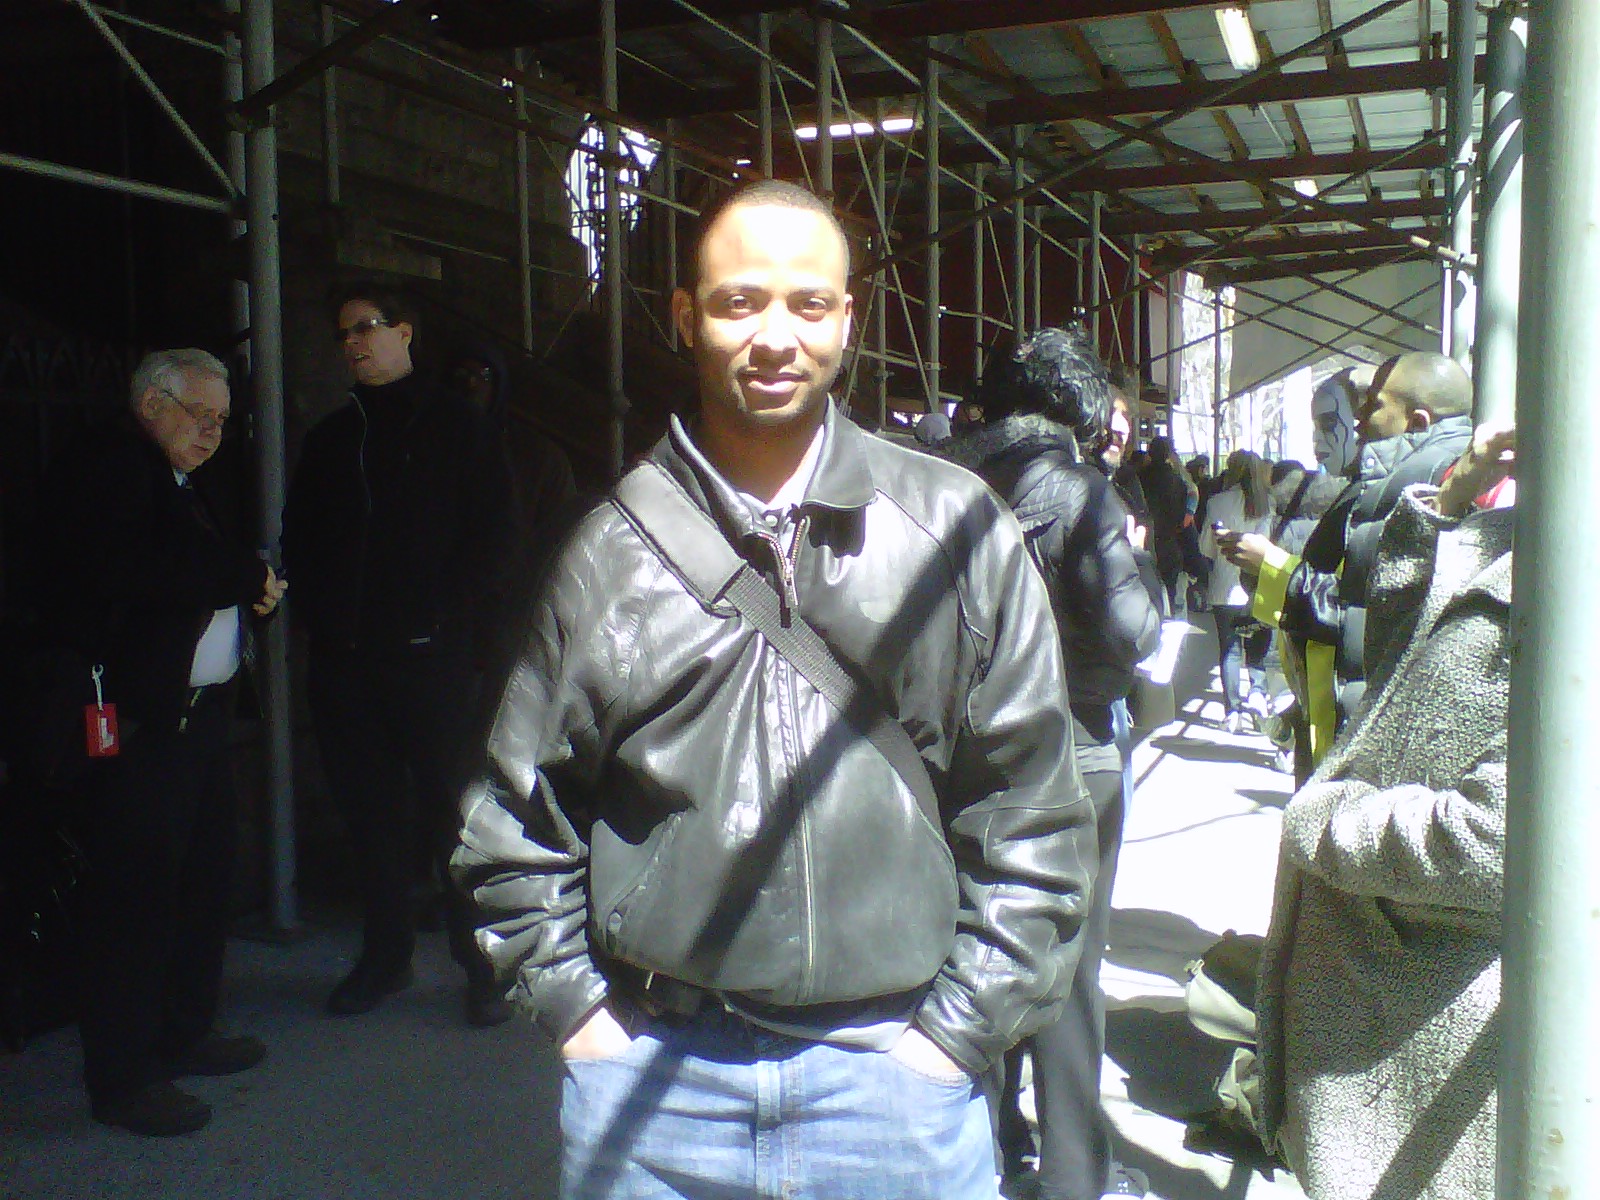 In New York for a casting call for 